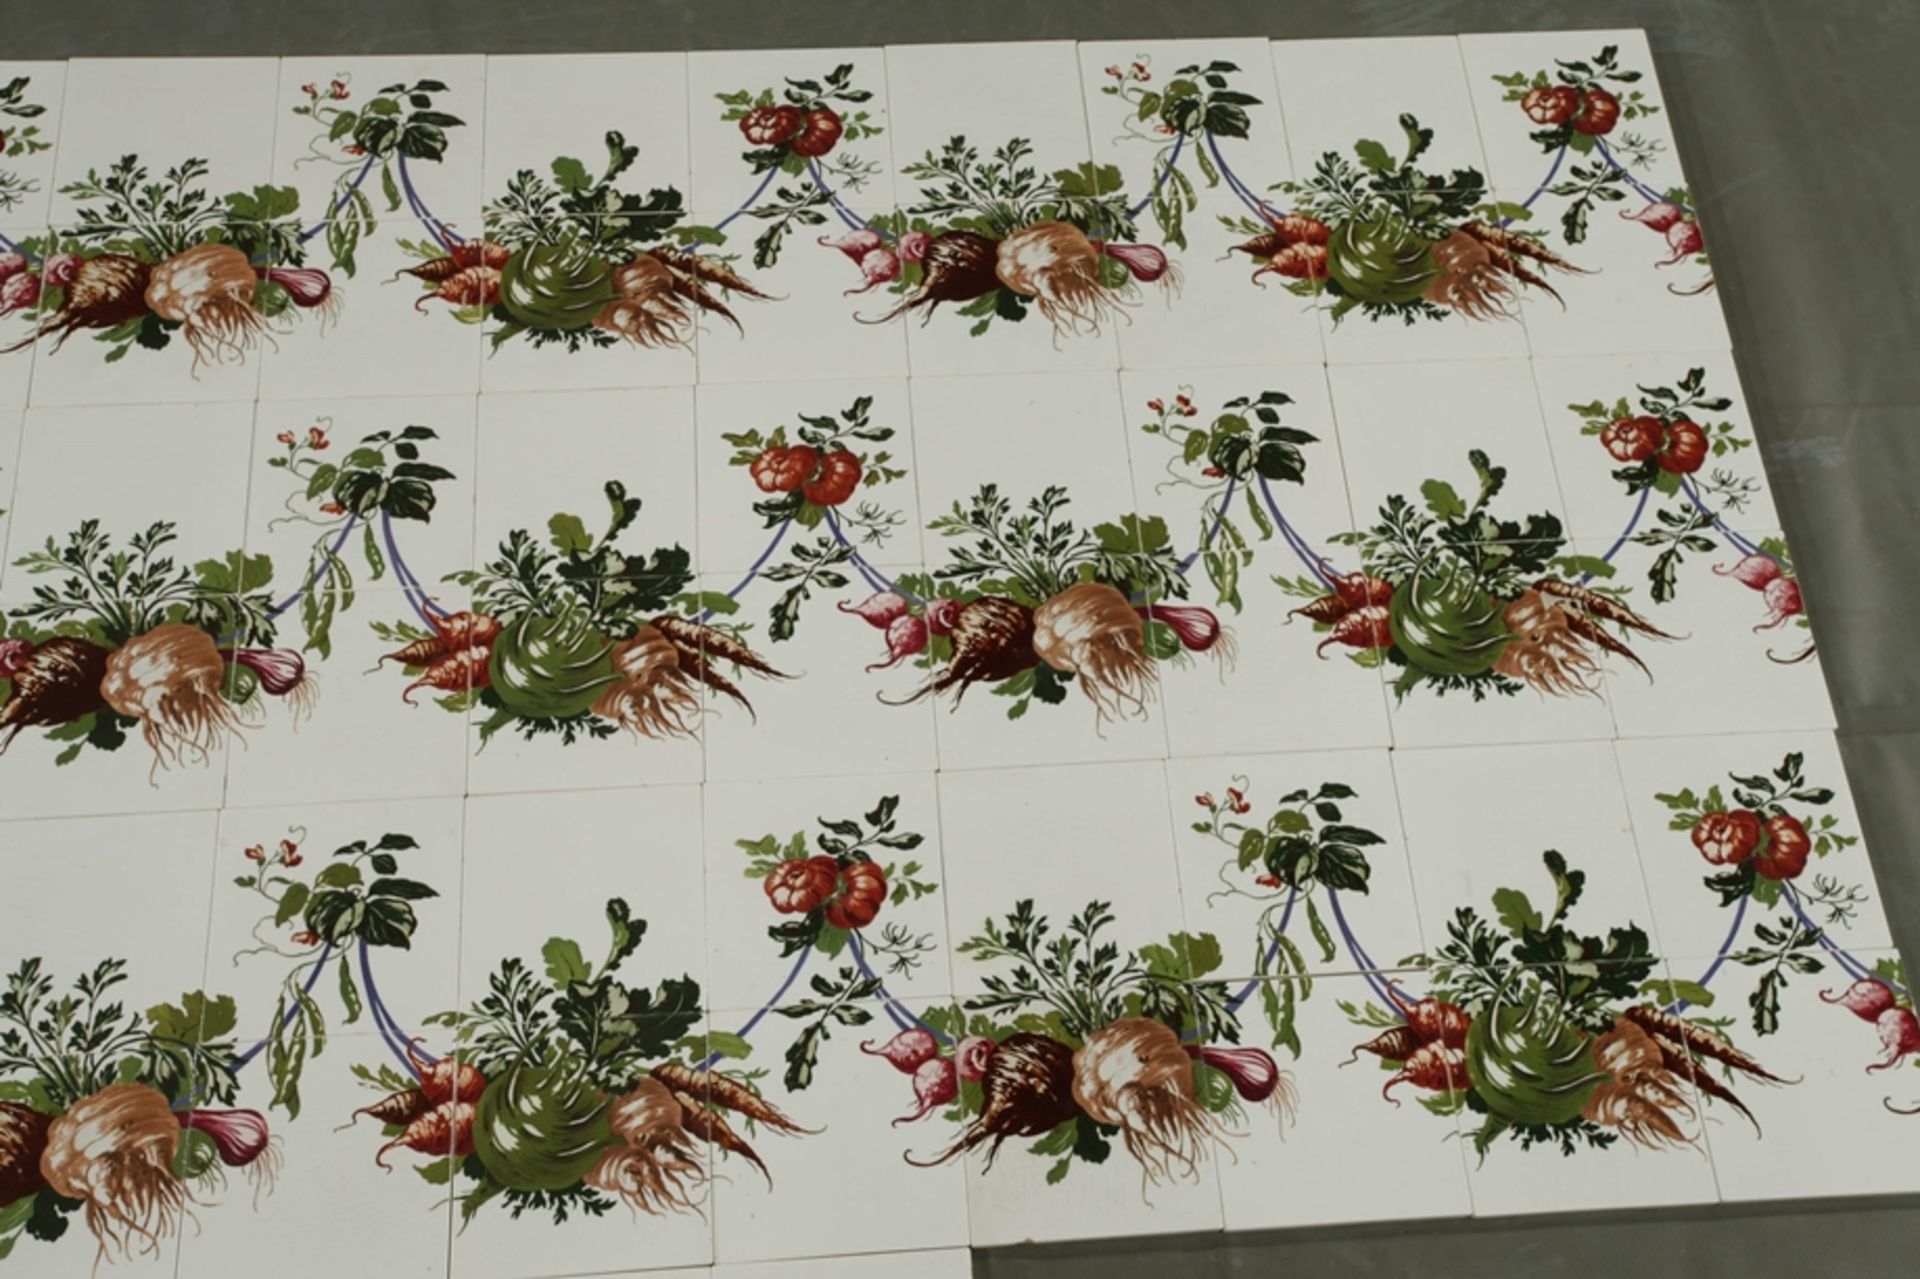 Villeroy & Boch wall tiles for a kitchen - Image 3 of 5